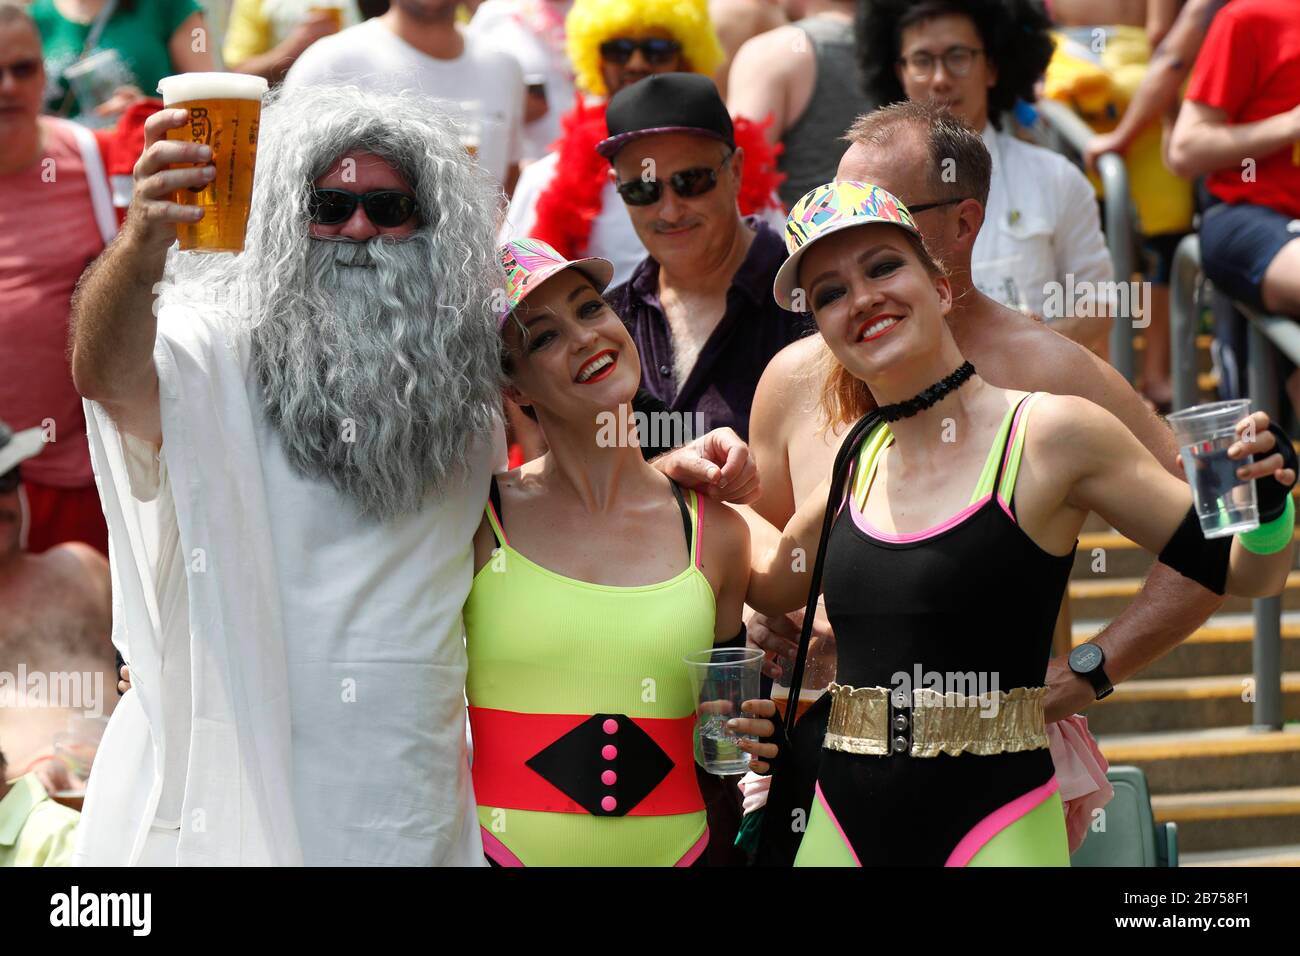 Fans attend the HSBC World Rugby Sevens Series on Day 2 at Hong Kong Stadium. Stock Photo